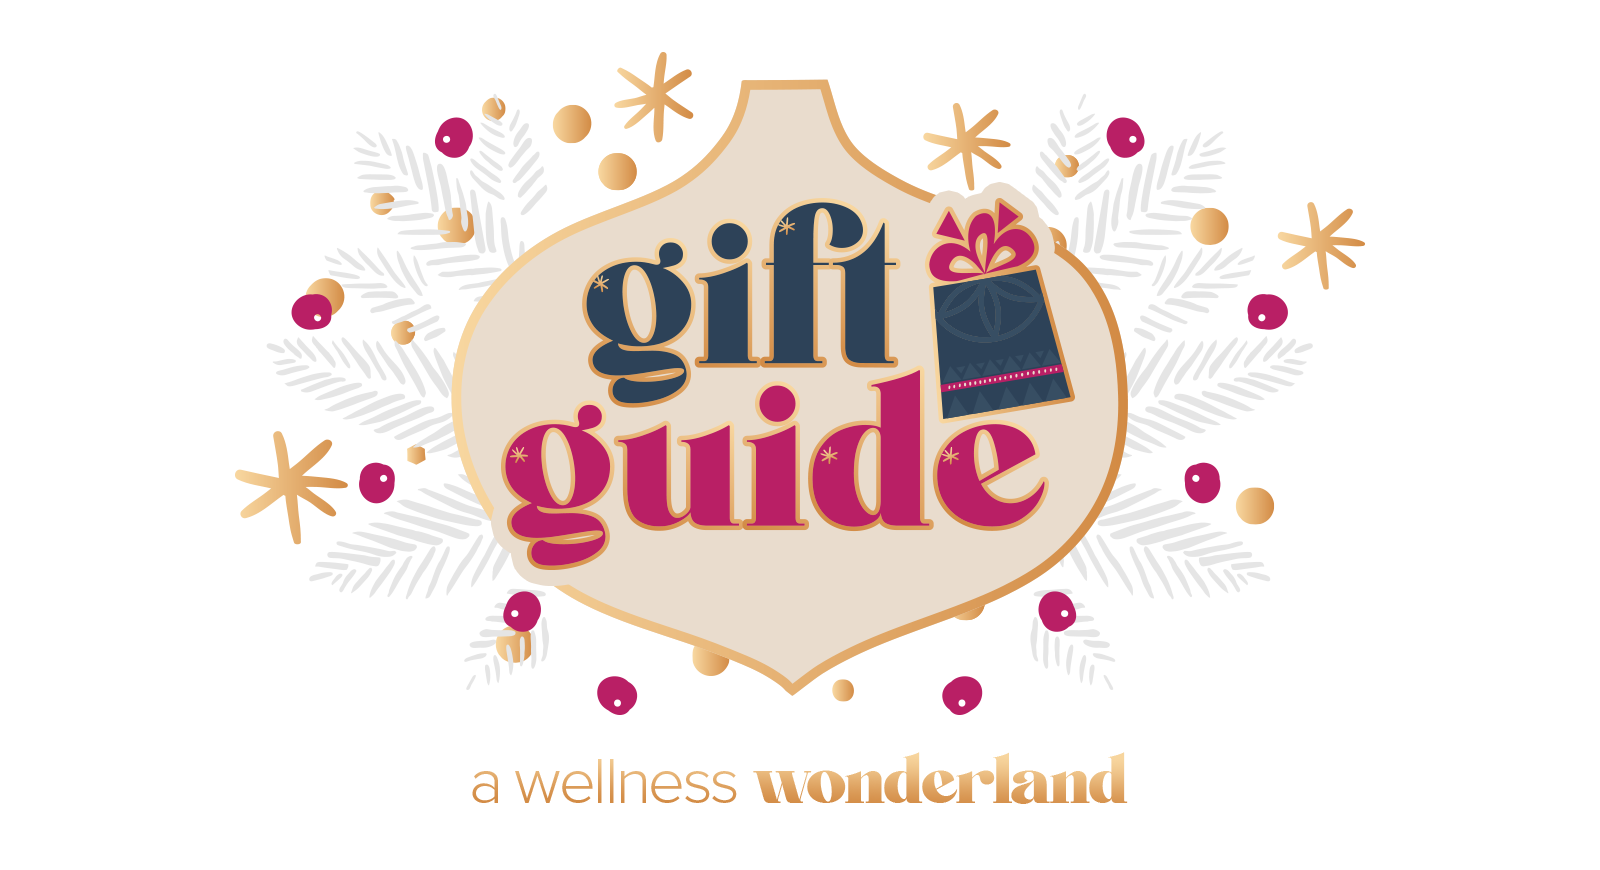 shop the holiday gift guide